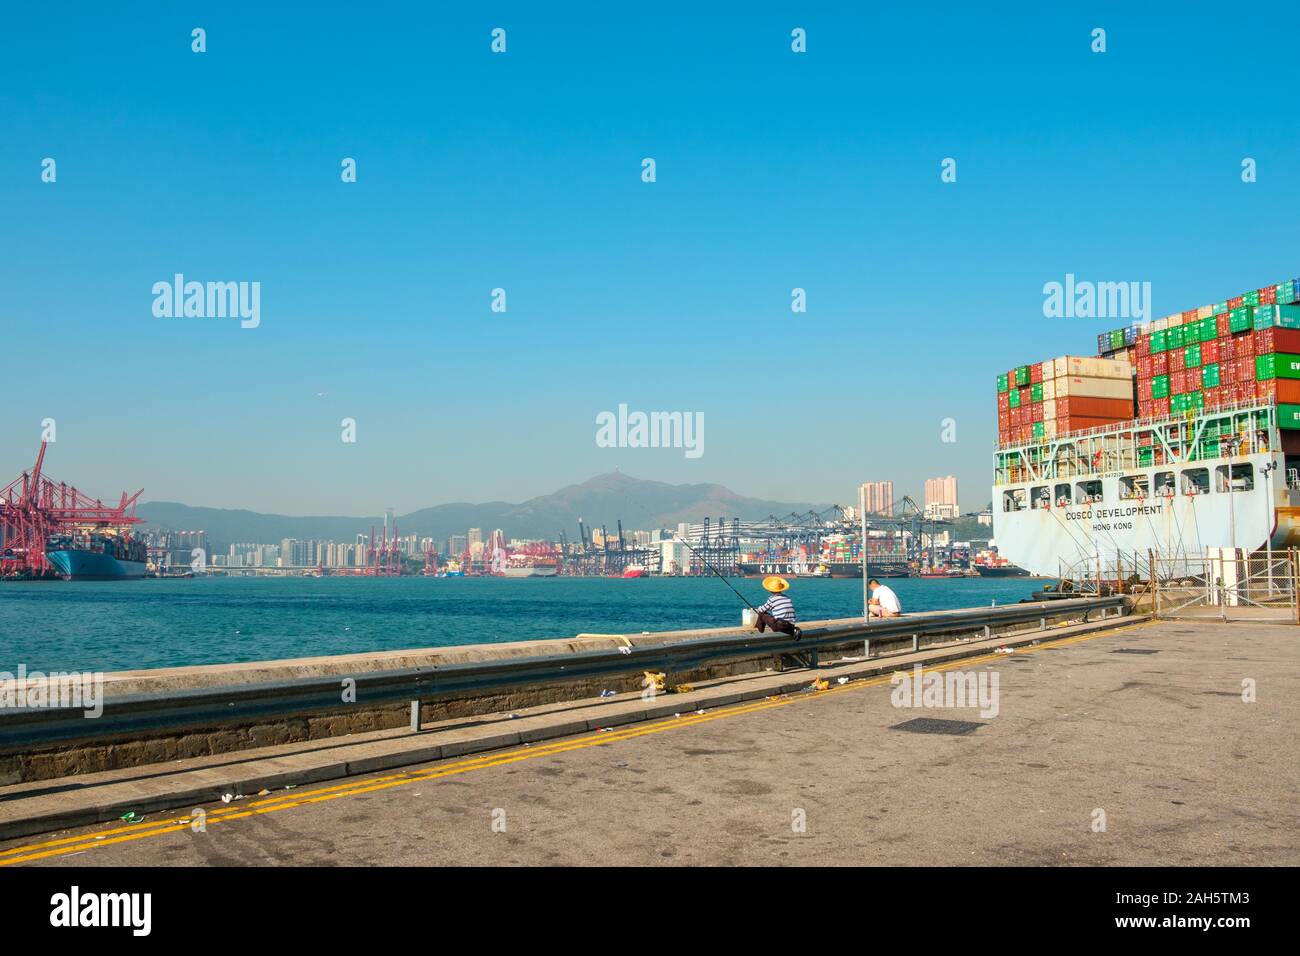 HongKong, China - November 2019: Stacked containers on container ship near freight harbour logistics centre in Hong Kong Stock Photo